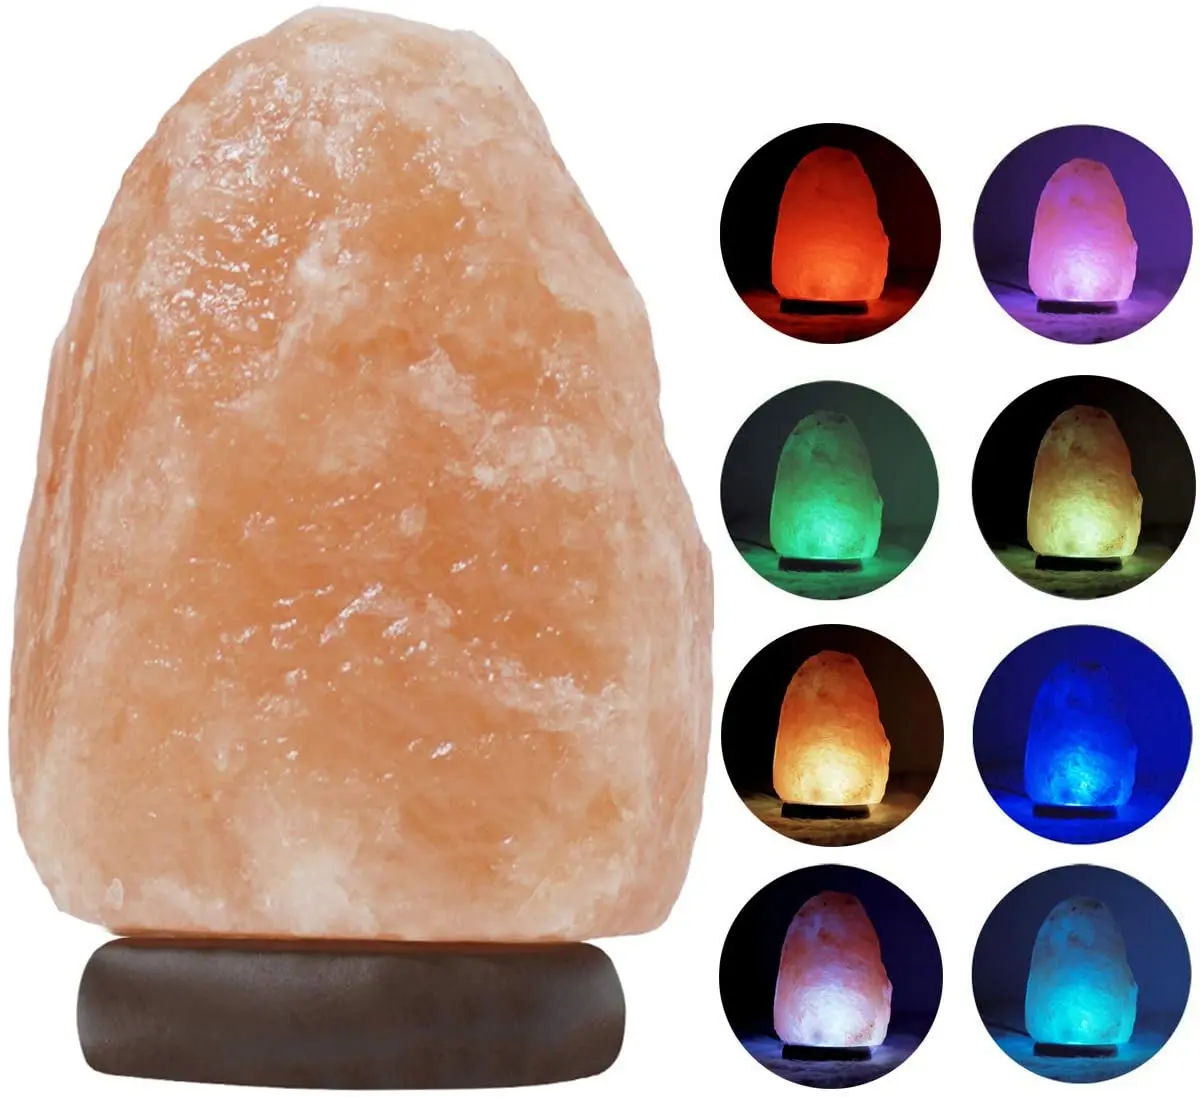 Hot Sell New 8 Color Change Relax Body Mind Usb Led Dimmer Crystal Natural Pink Himalayan Salt Rock Lamp for Home Decor Gift From m.alibaba.com